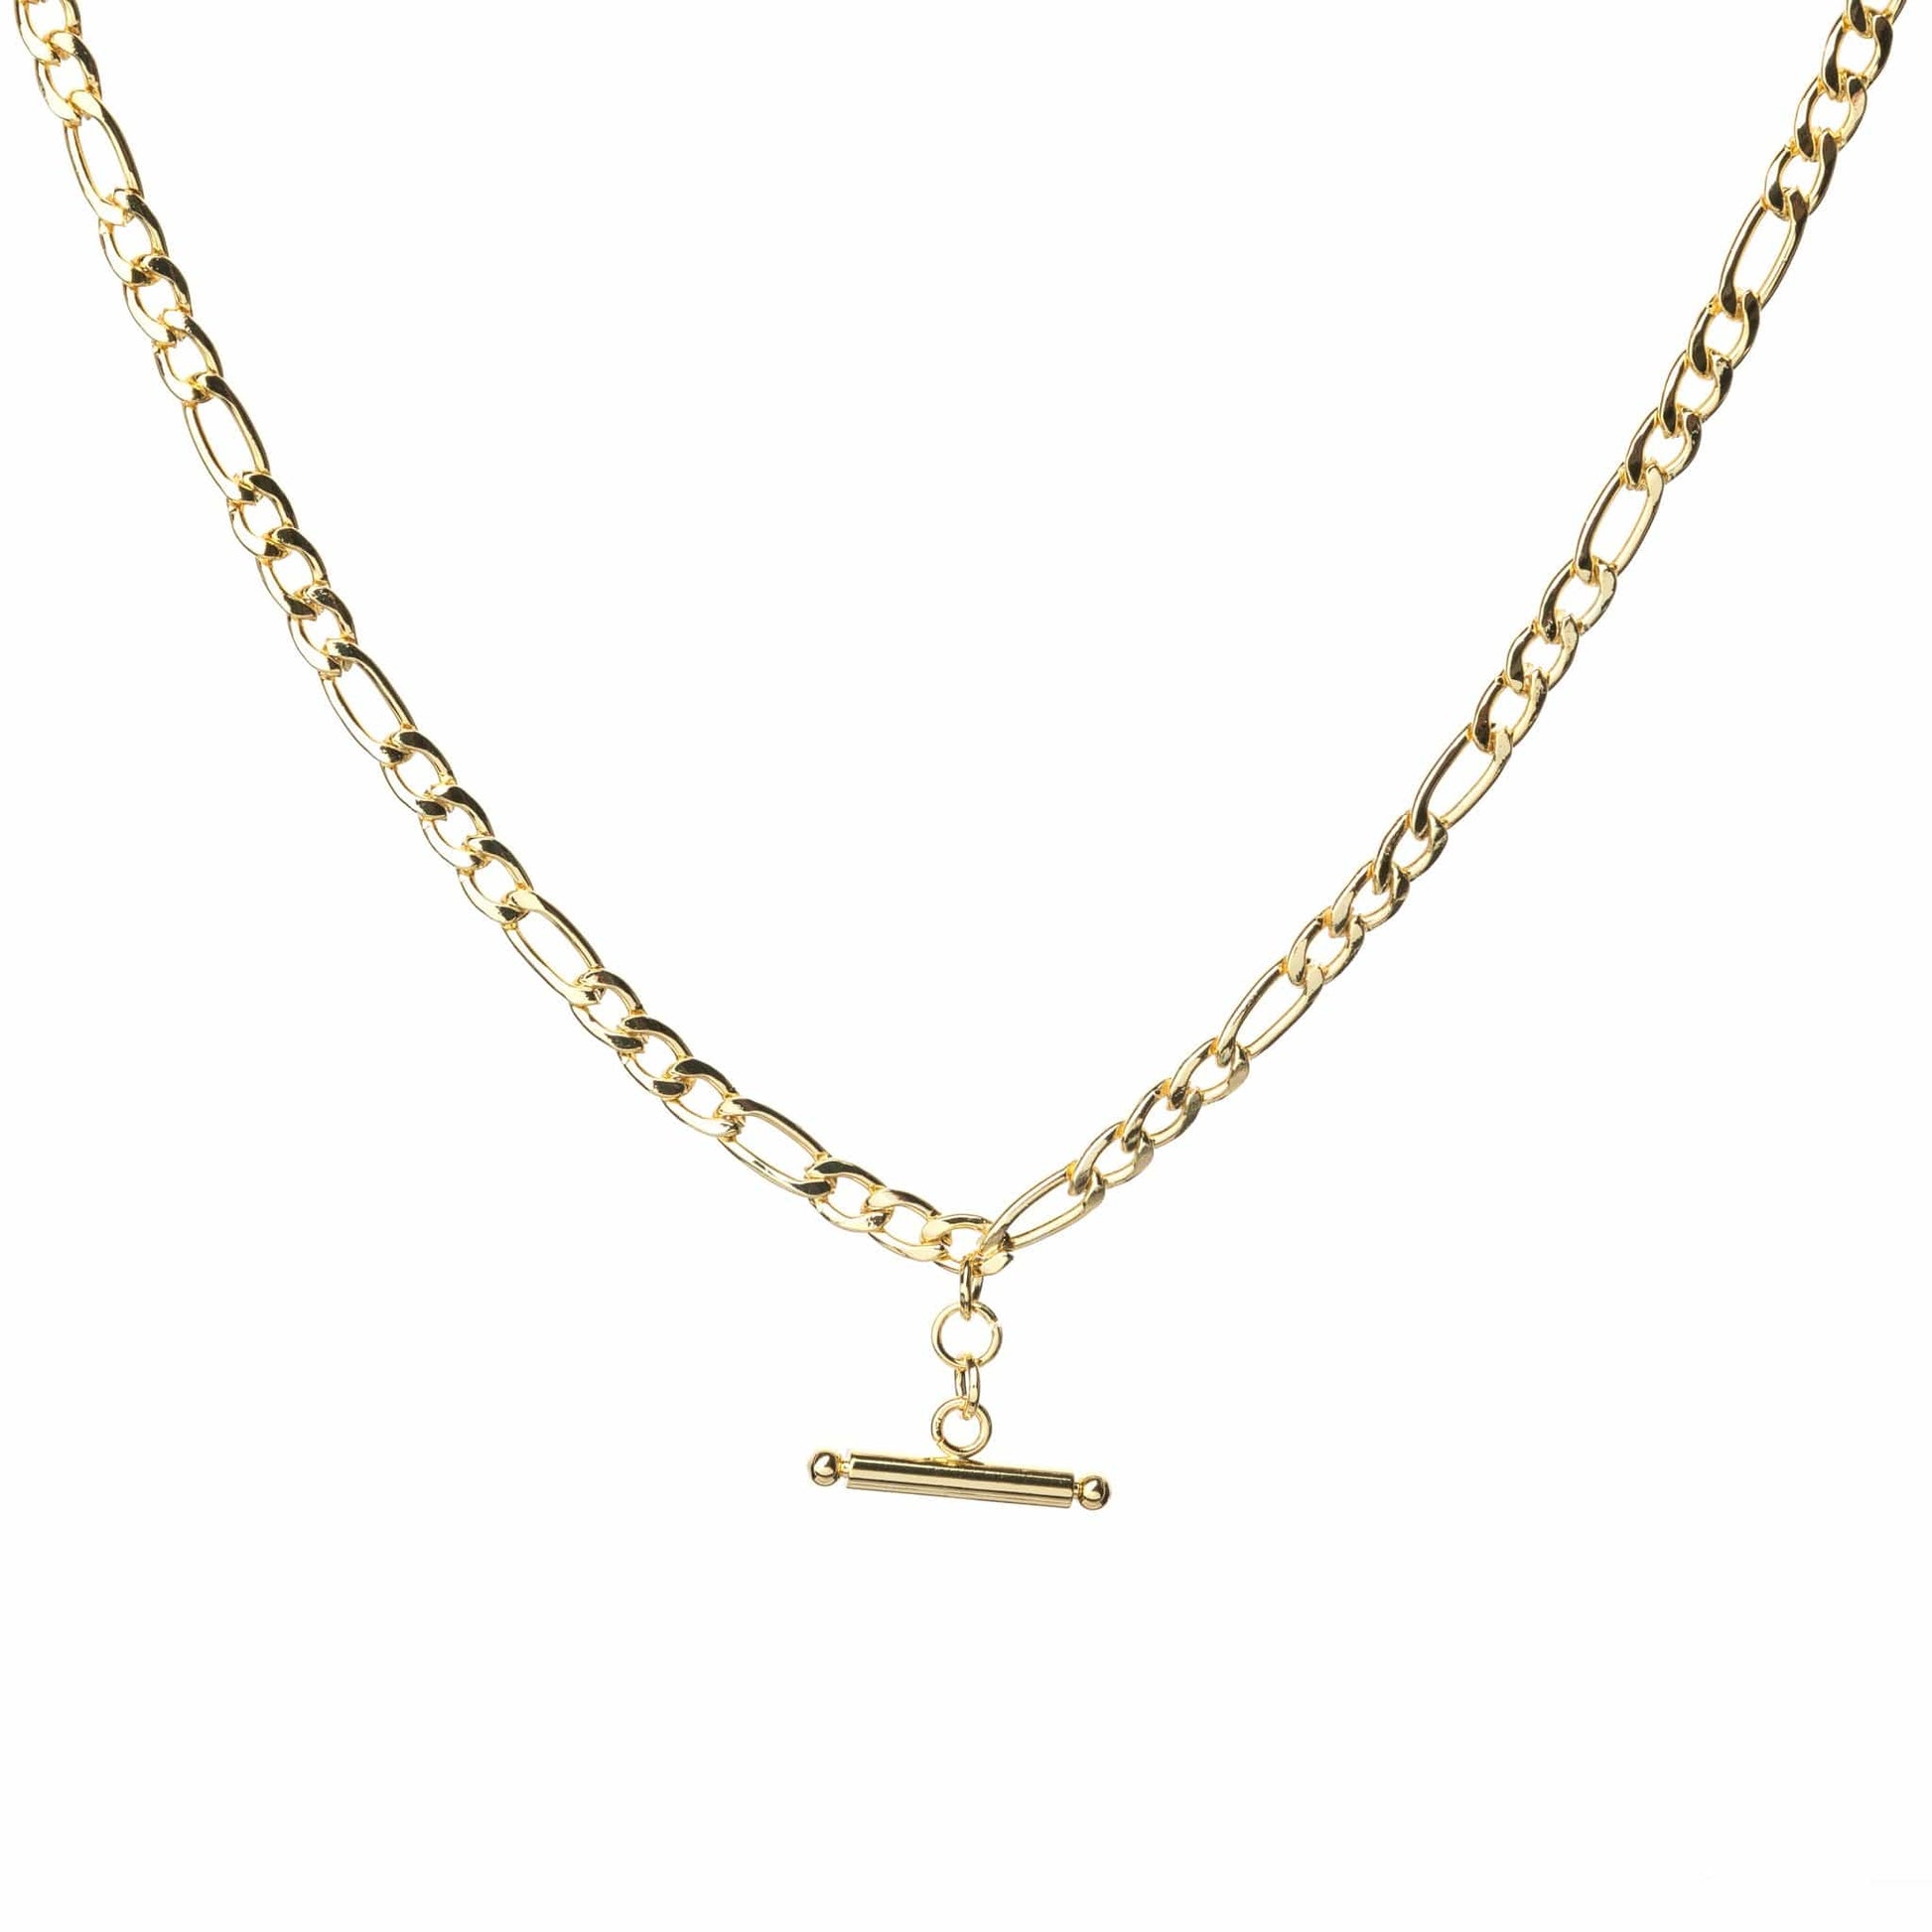 T-bar necklace on a figaro chain